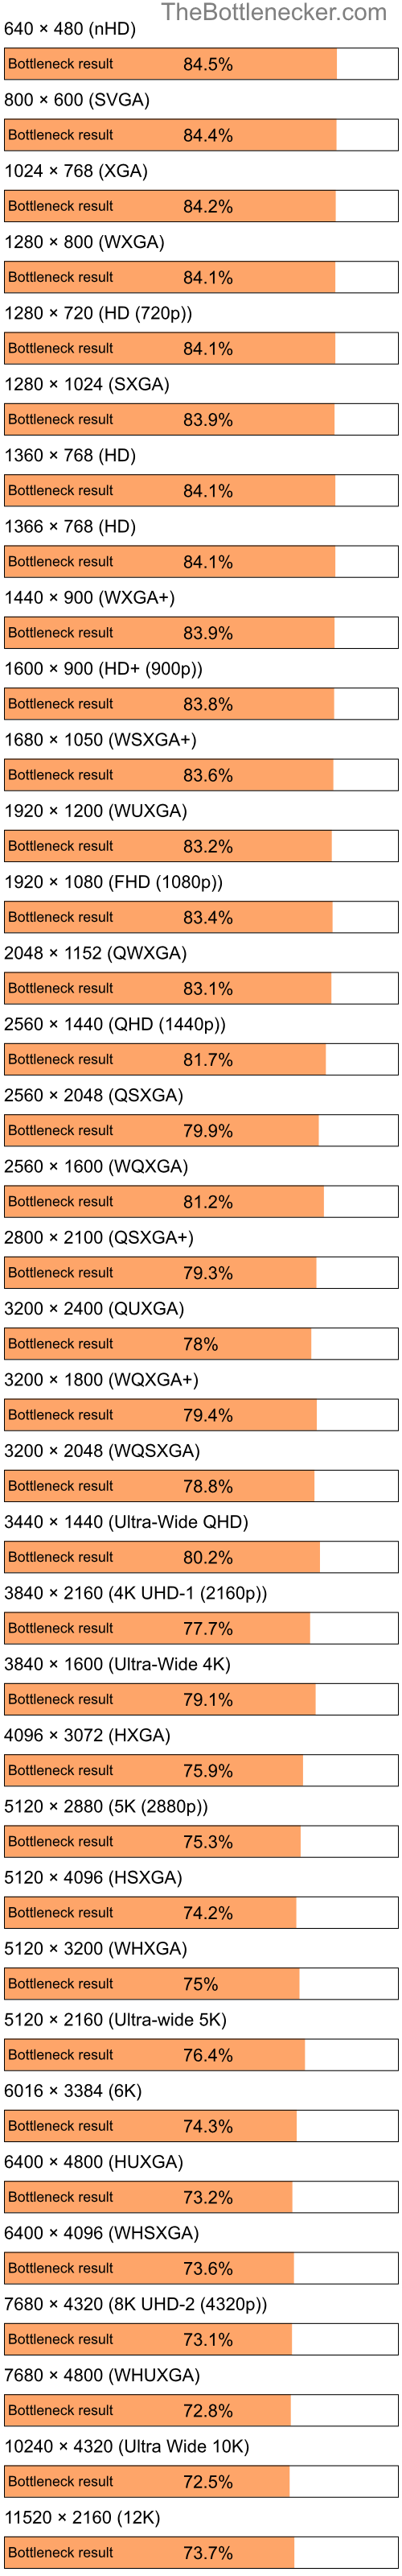 Bottleneck results by resolution for Intel Pentium 4 and NVIDIA GeForce RTX 3070 in Graphic Card Intense Tasks